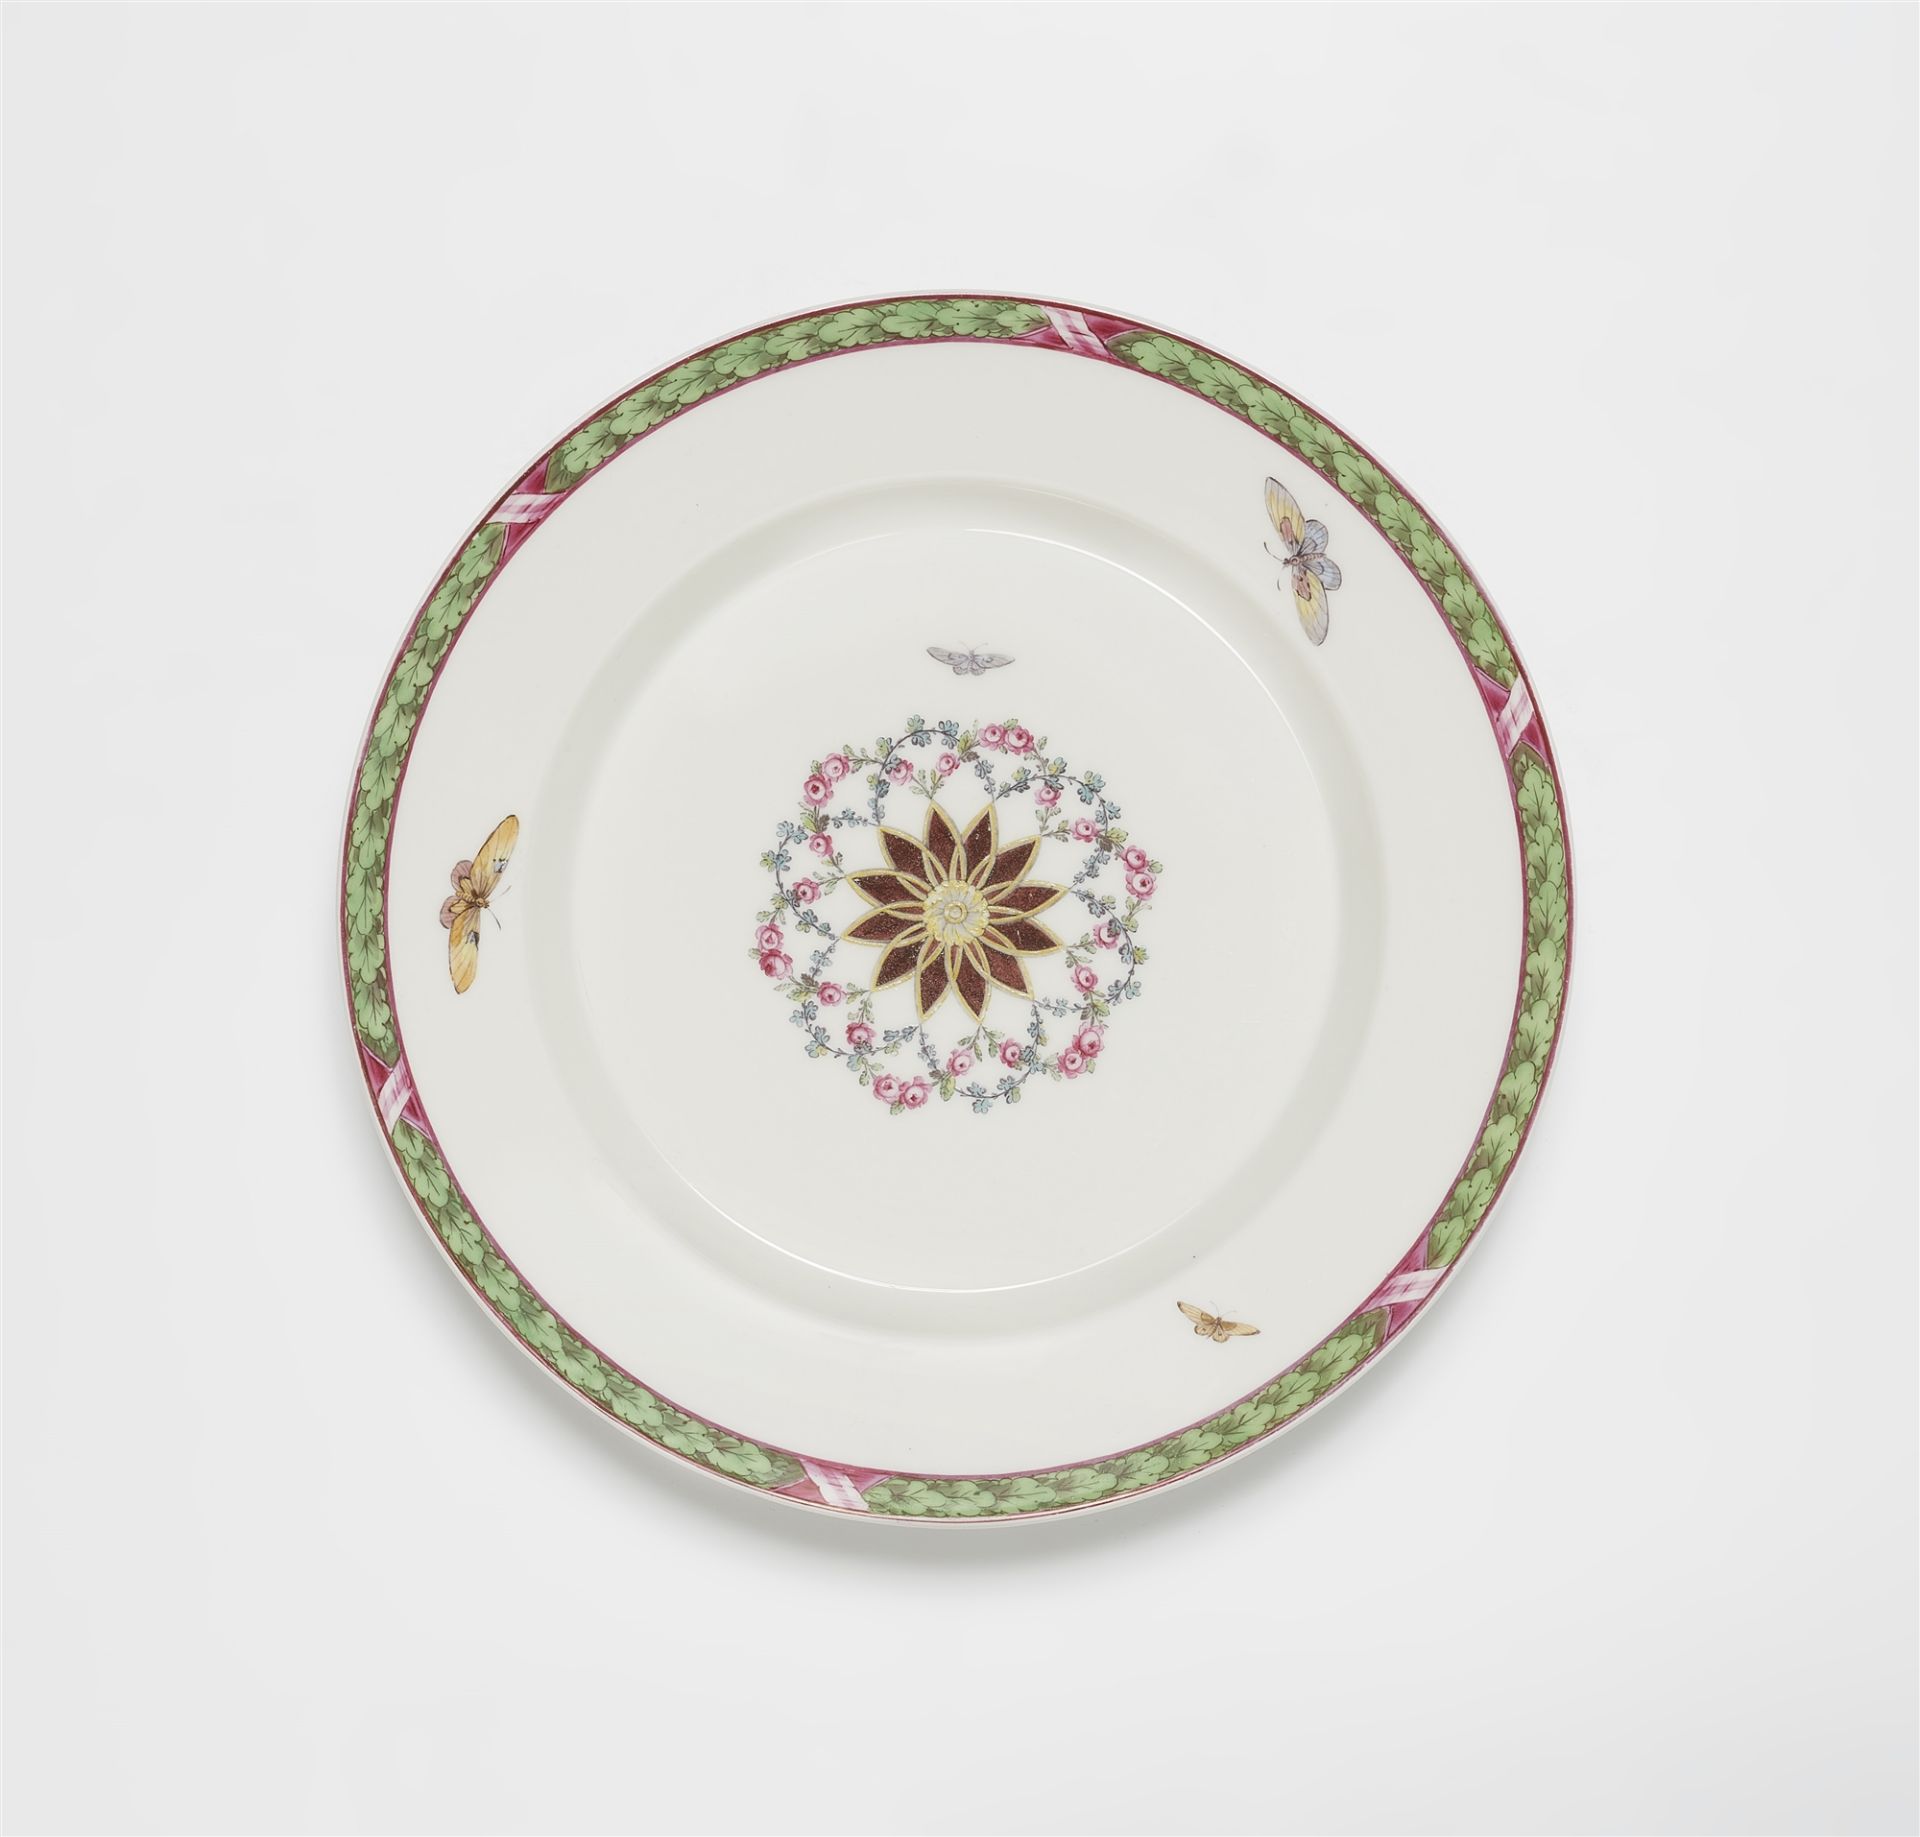 A dinner plate from the service for Crown Prince Friedrich Wilhelm